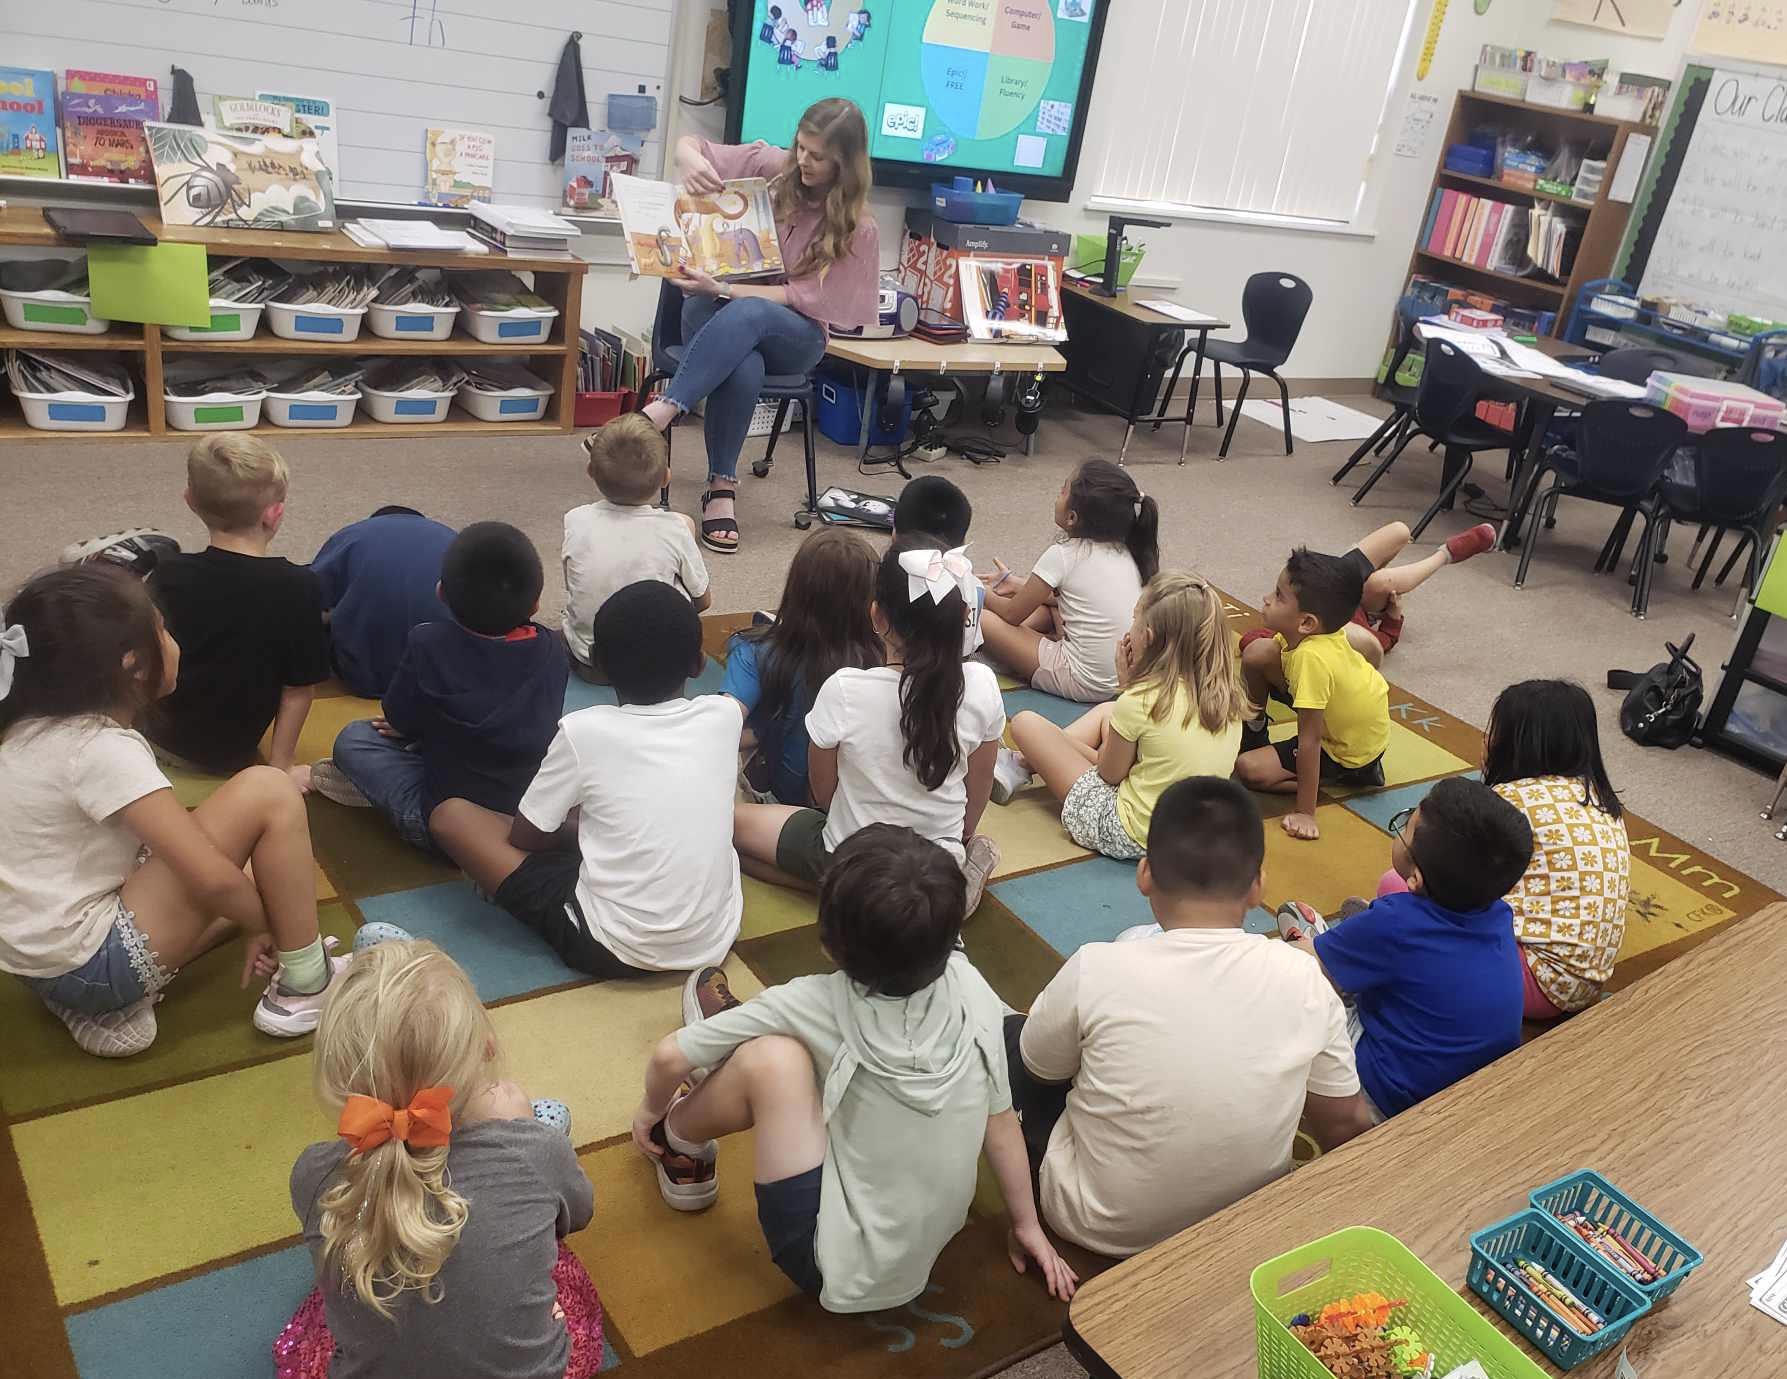 Taylor Plugge, consumer loan officer in Clarksville, donated $500 to Clarksville Rotary Club through our Community Involvement Program. Over the past year, Taylor has played an active role in her organization. Pictured is Taylor participating in the Rotary Readers Program where she read once a week to the local primary and elementary school to promote the importance of literacy and reading at a young age.